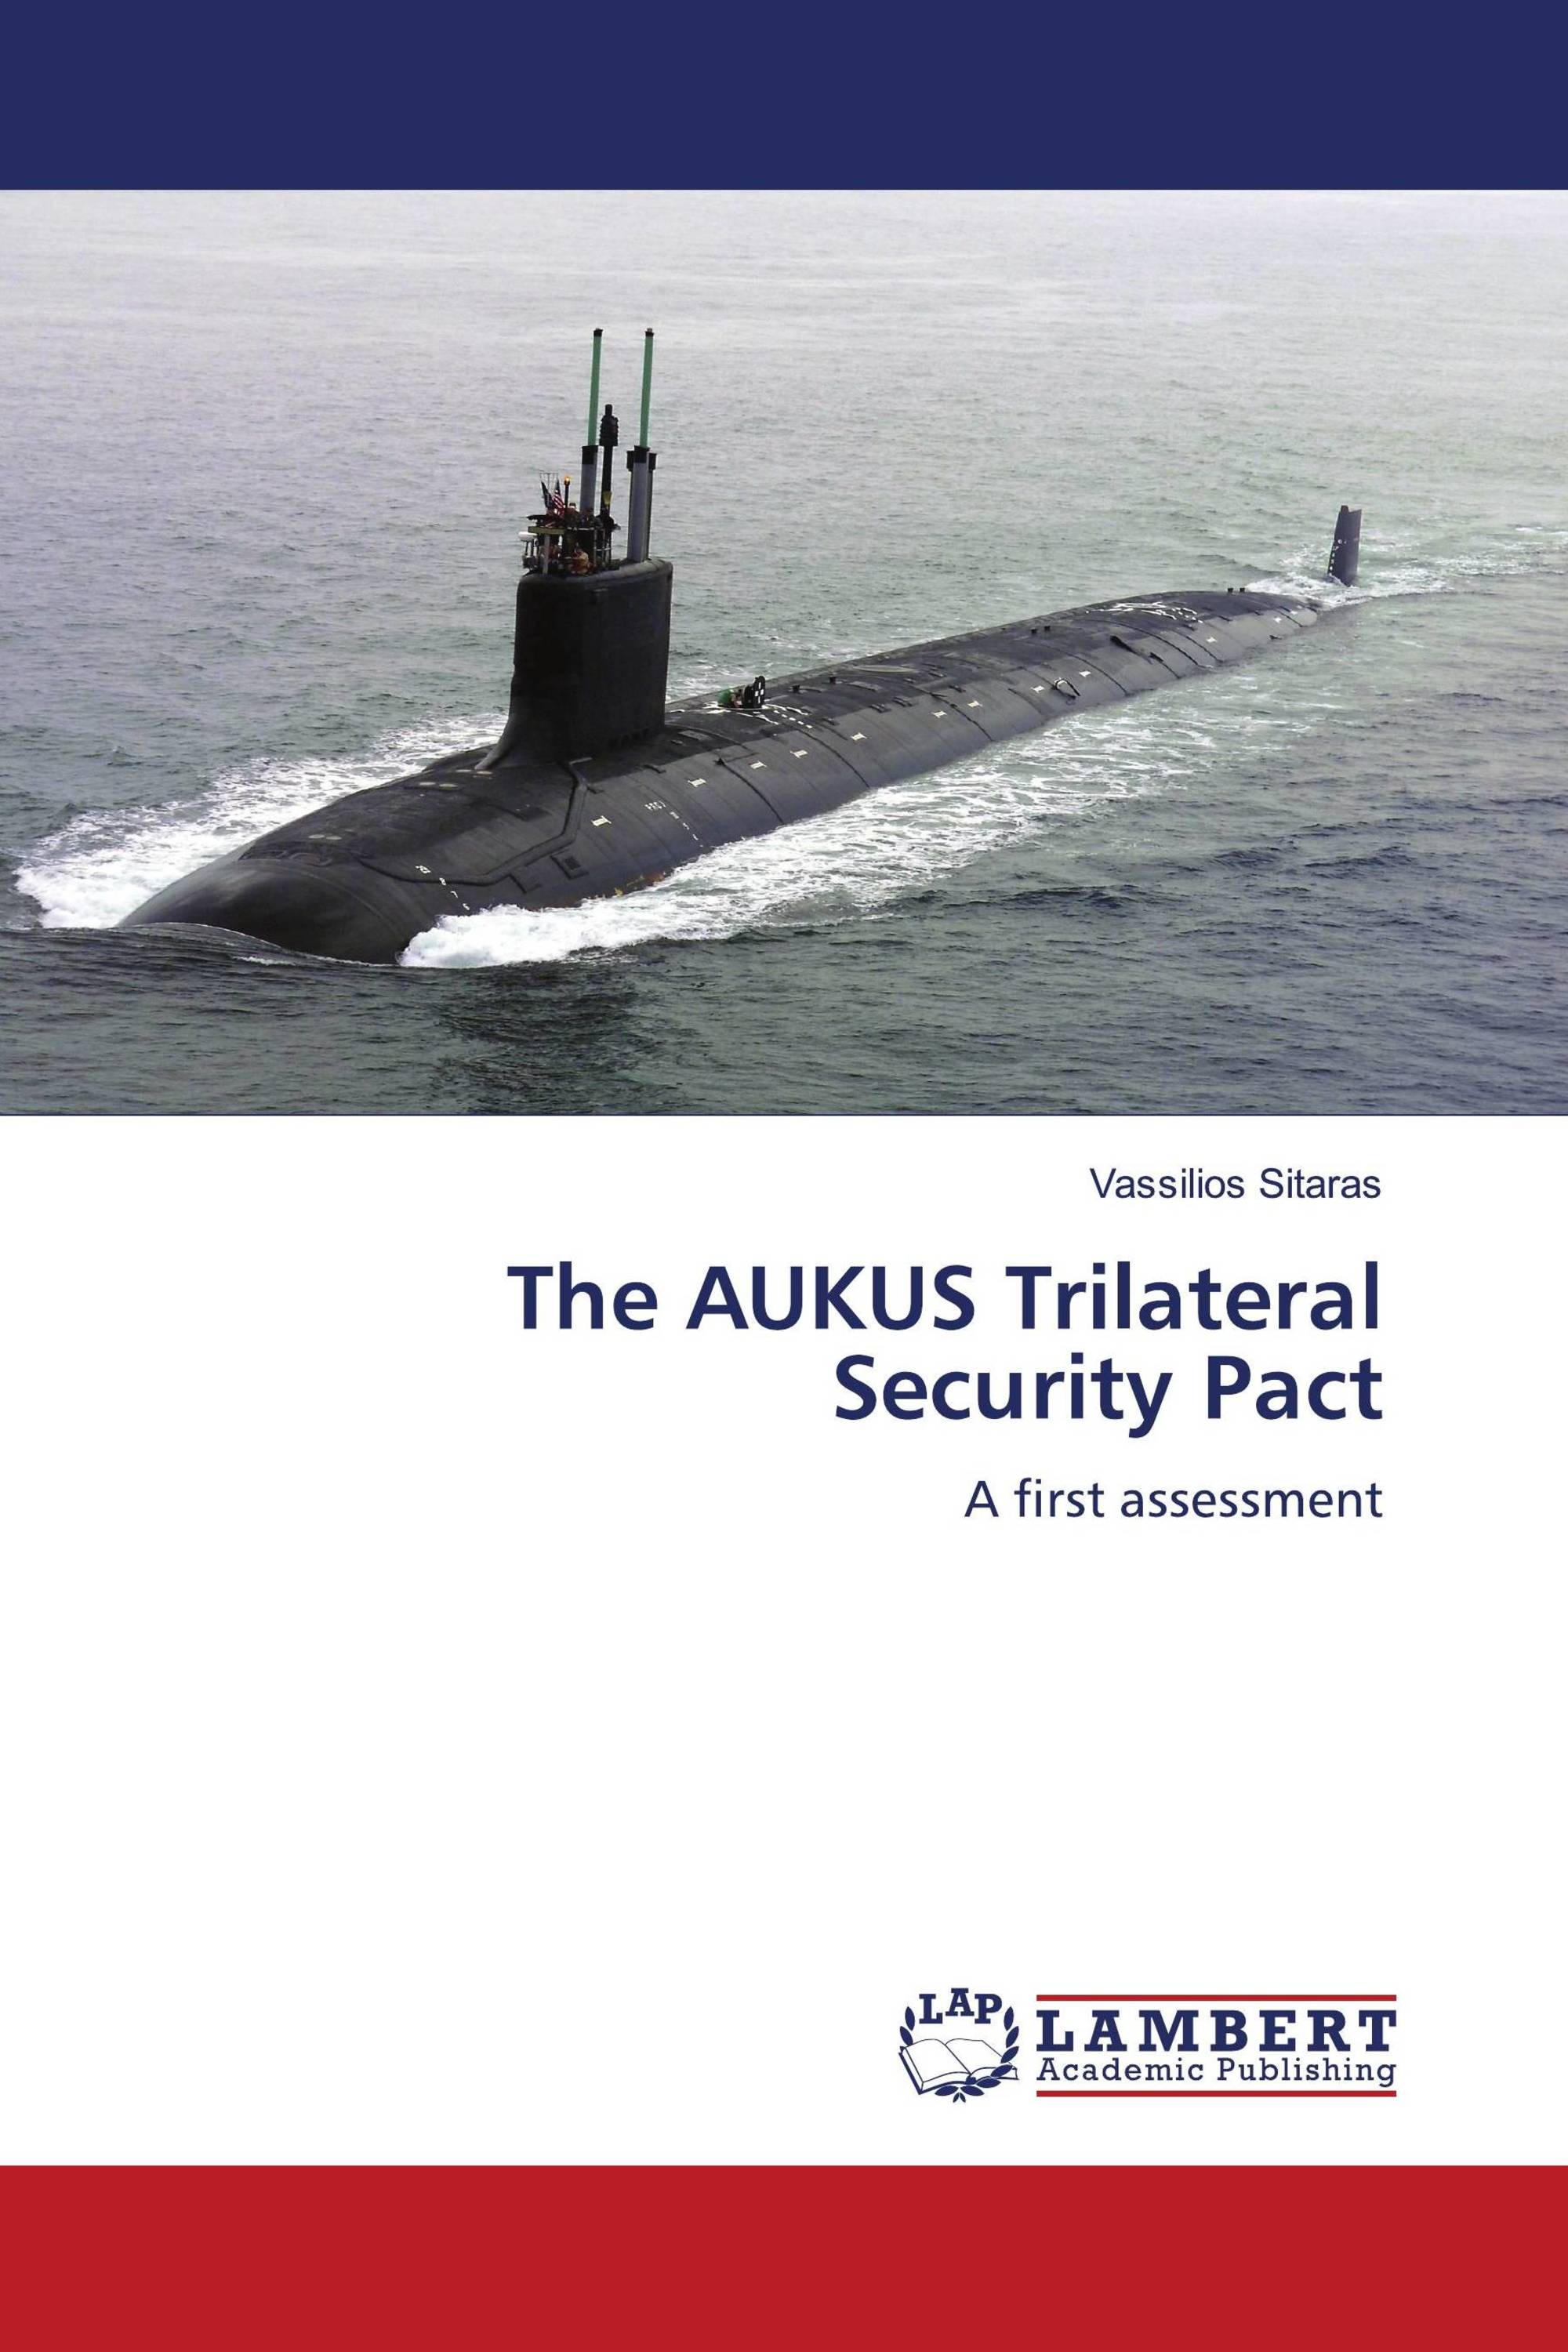 The AUKUS Trilateral Security Pact